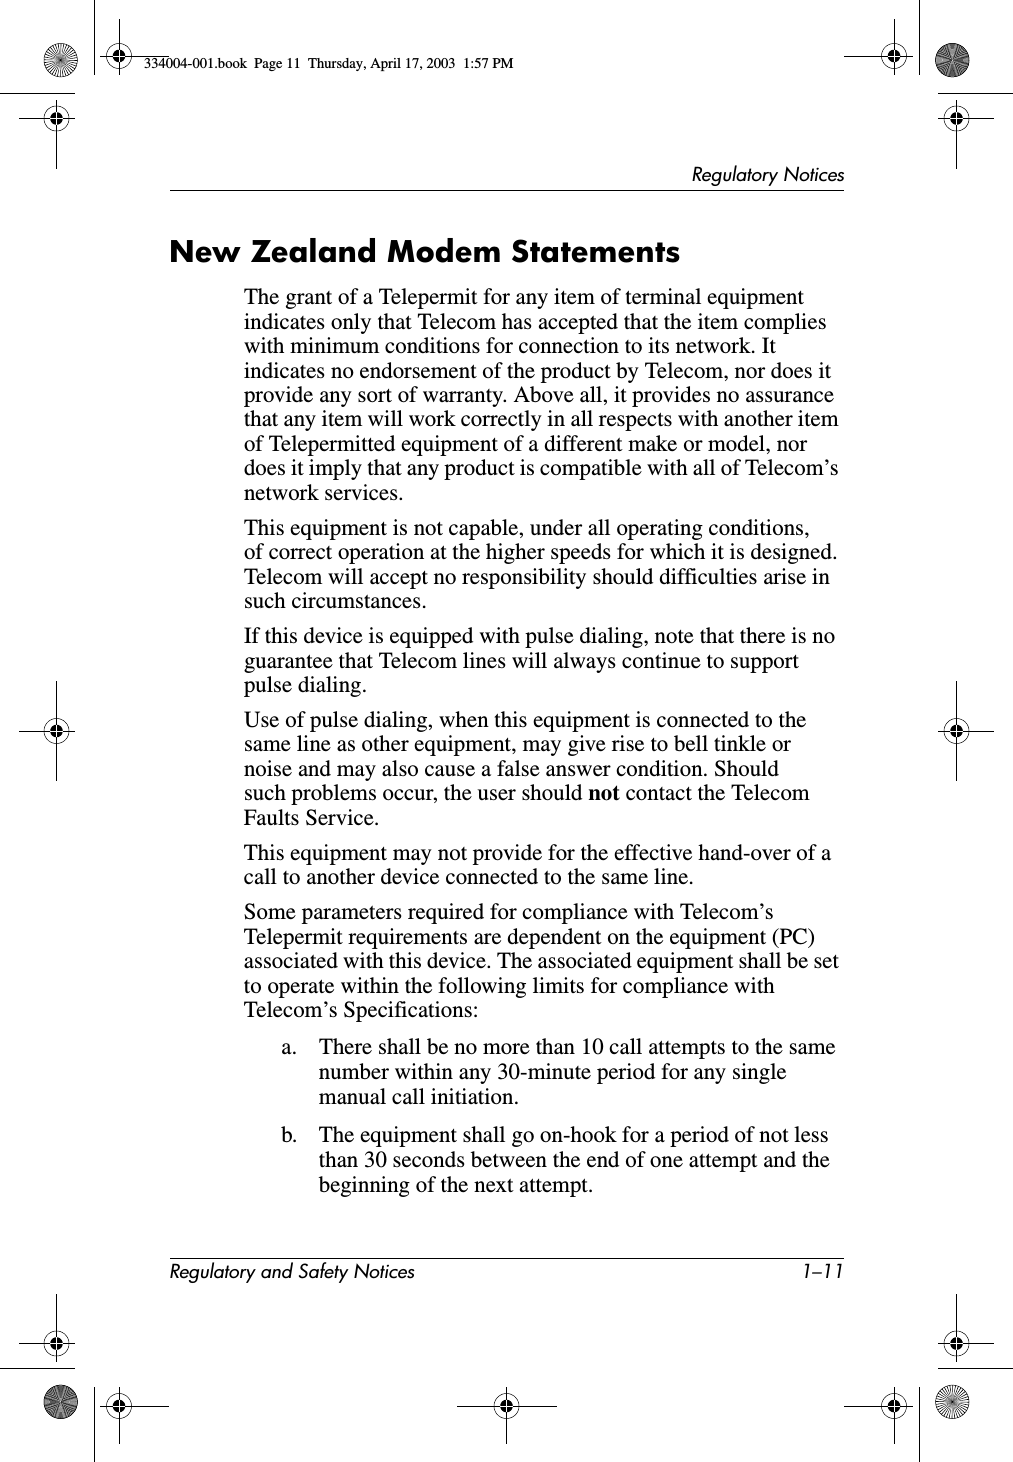 Regulatory NoticesRegulatory and Safety Notices 1–11New Zealand Modem StatementsThe grant of a Telepermit for any item of terminal equipment indicates only that Telecom has accepted that the item complies with minimum conditions for connection to its network. It indicates no endorsement of the product by Telecom, nor does it provide any sort of warranty. Above all, it provides no assurance that any item will work correctly in all respects with another item of Telepermitted equipment of a different make or model, nor does it imply that any product is compatible with all of Telecom’s network services.This equipment is not capable, under all operating conditions, of correct operation at the higher speeds for which it is designed. Telecom will accept no responsibility should difficulties arise in such circumstances.If this device is equipped with pulse dialing, note that there is no guarantee that Telecom lines will always continue to support pulse dialing.Use of pulse dialing, when this equipment is connected to the same line as other equipment, may give rise to bell tinkle or noise and may also cause a false answer condition. Should such problems occur, the user should not contact the Telecom Faults Service.This equipment may not provide for the effective hand-over of a call to another device connected to the same line.Some parameters required for compliance with Telecom’s Telepermit requirements are dependent on the equipment (PC) associated with this device. The associated equipment shall be set to operate within the following limits for compliance with Telecom’s Specifications:a. There shall be no more than 10 call attempts to the same number within any 30-minute period for any single manual call initiation.b. The equipment shall go on-hook for a period of not less than 30 seconds between the end of one attempt and the beginning of the next attempt.334004-001.book  Page 11  Thursday, April 17, 2003  1:57 PM